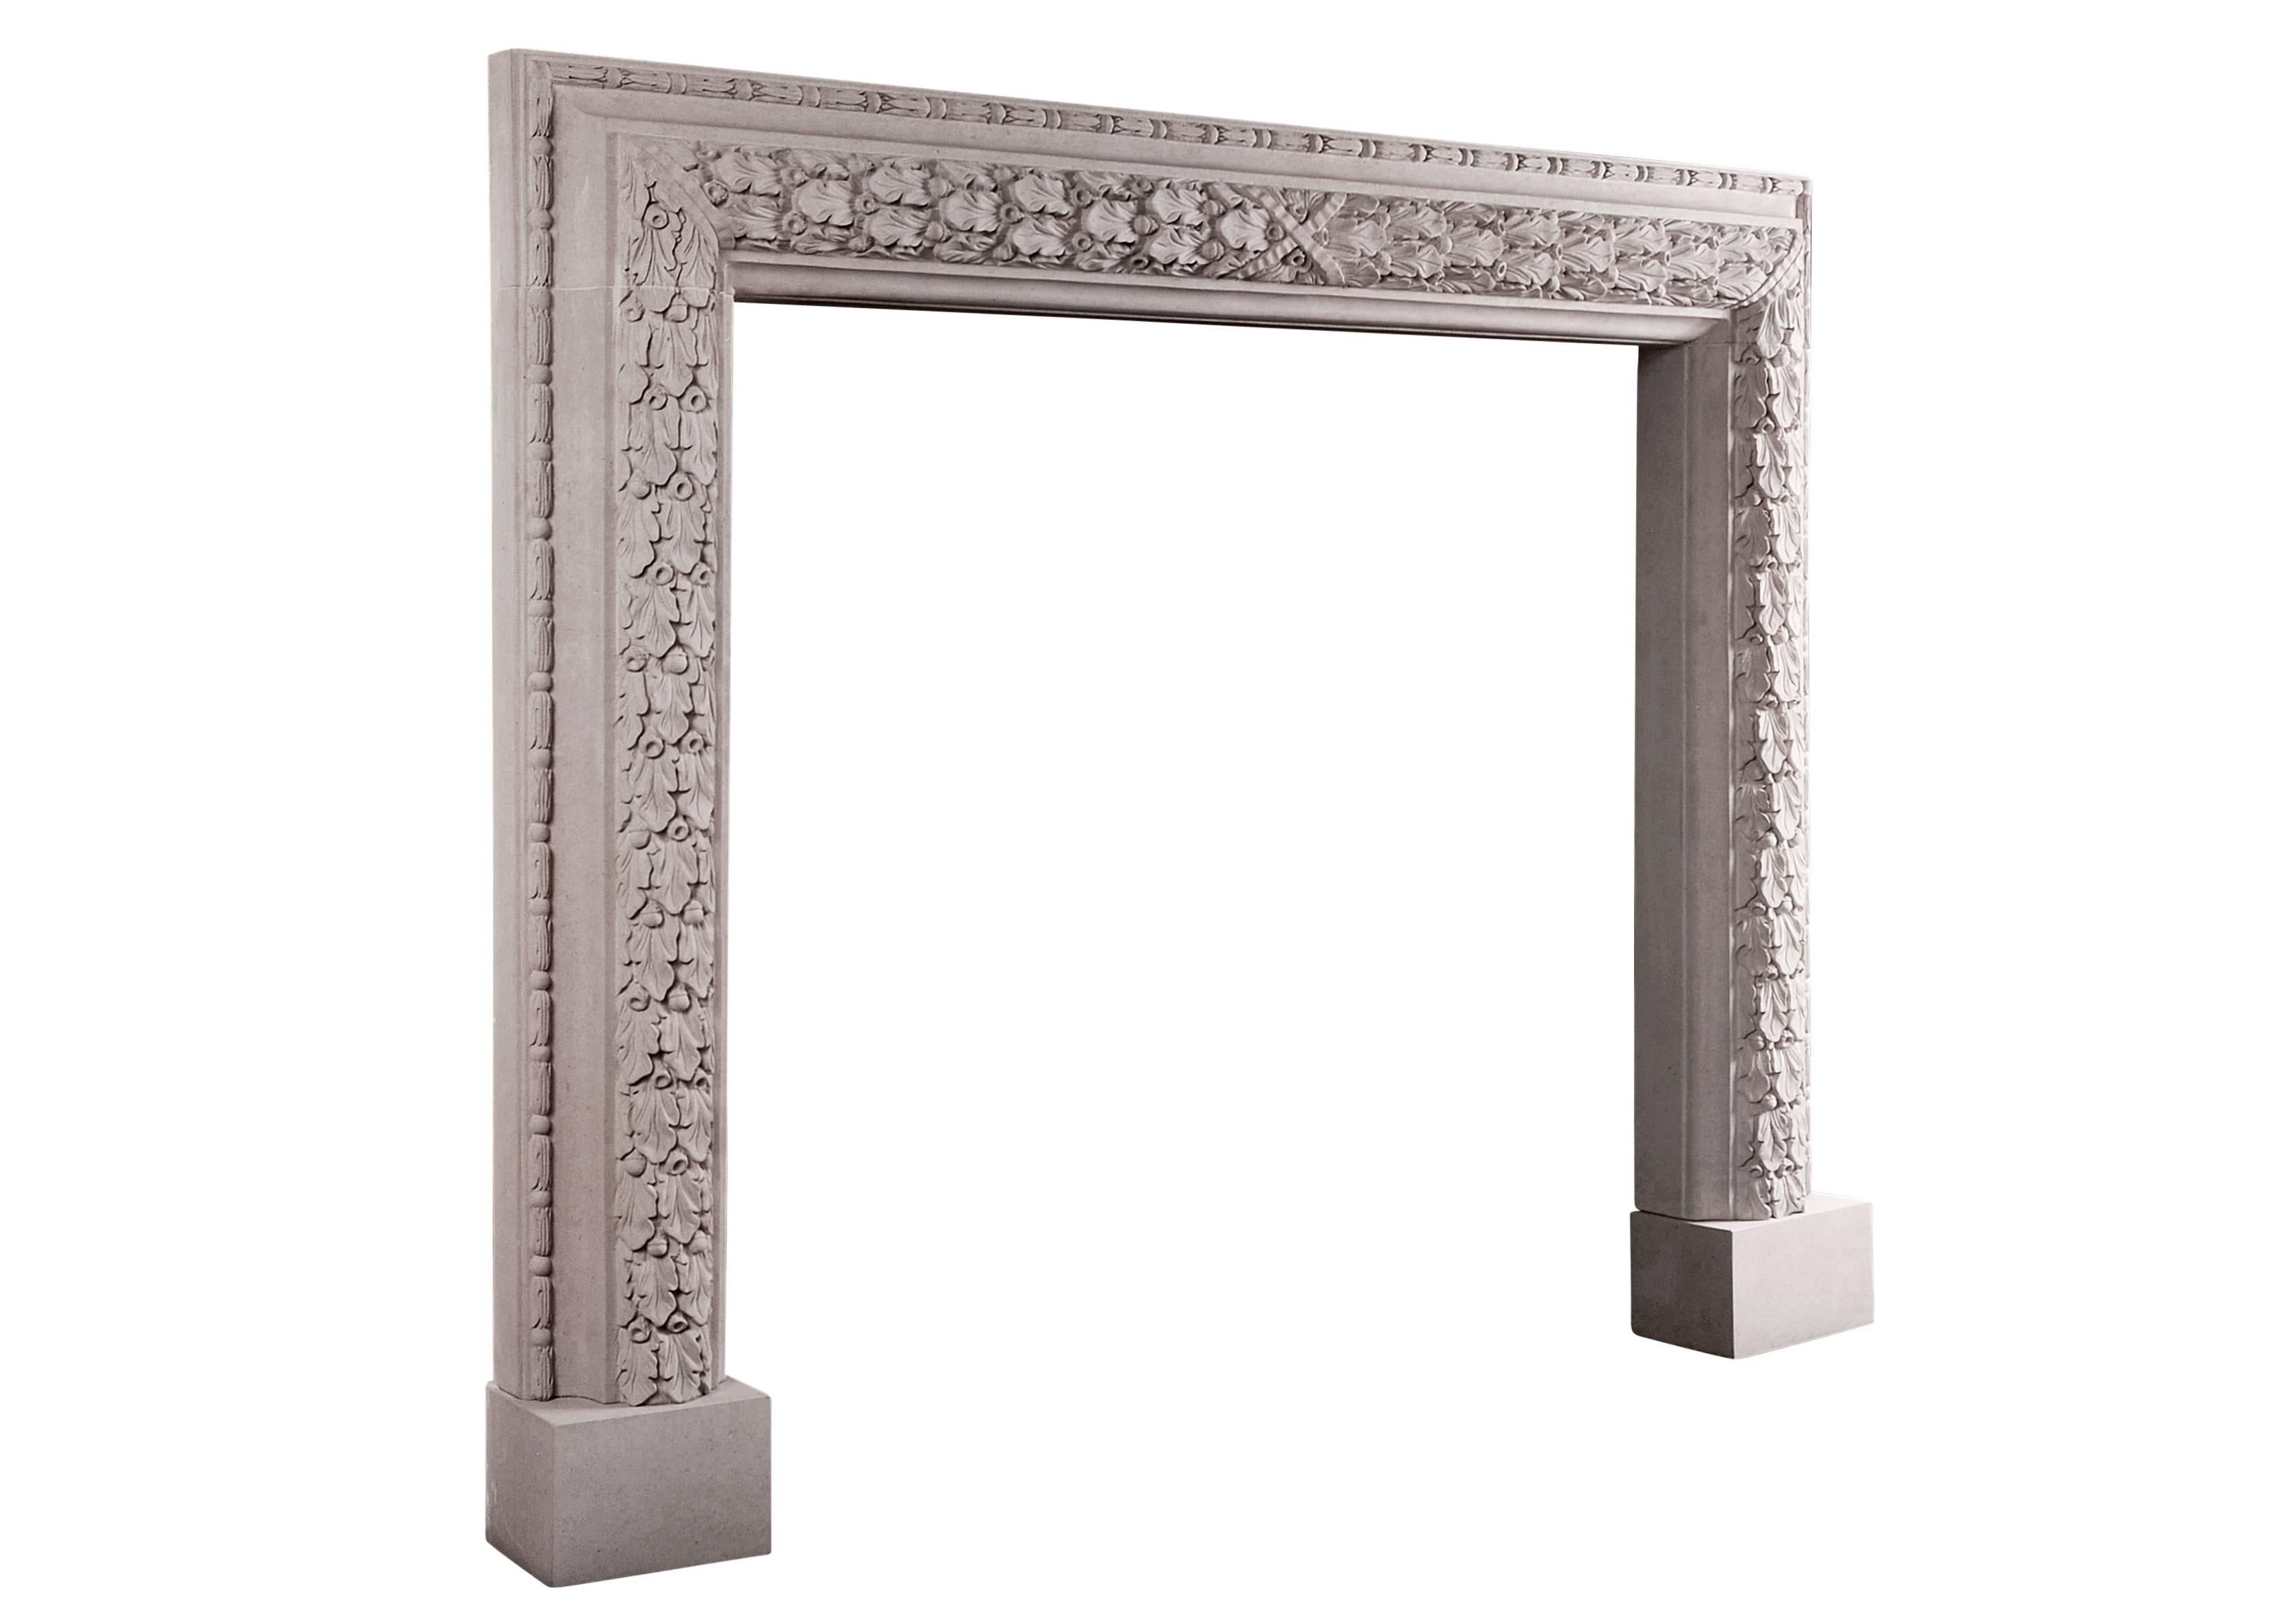 An elegant and understated Portland stone bolection molded fireplace with carved oak leaf decoration and cross banded centre ribbon. A copy of a period original. Could be made to any size in various materials if required.

Measures: Shelf width -